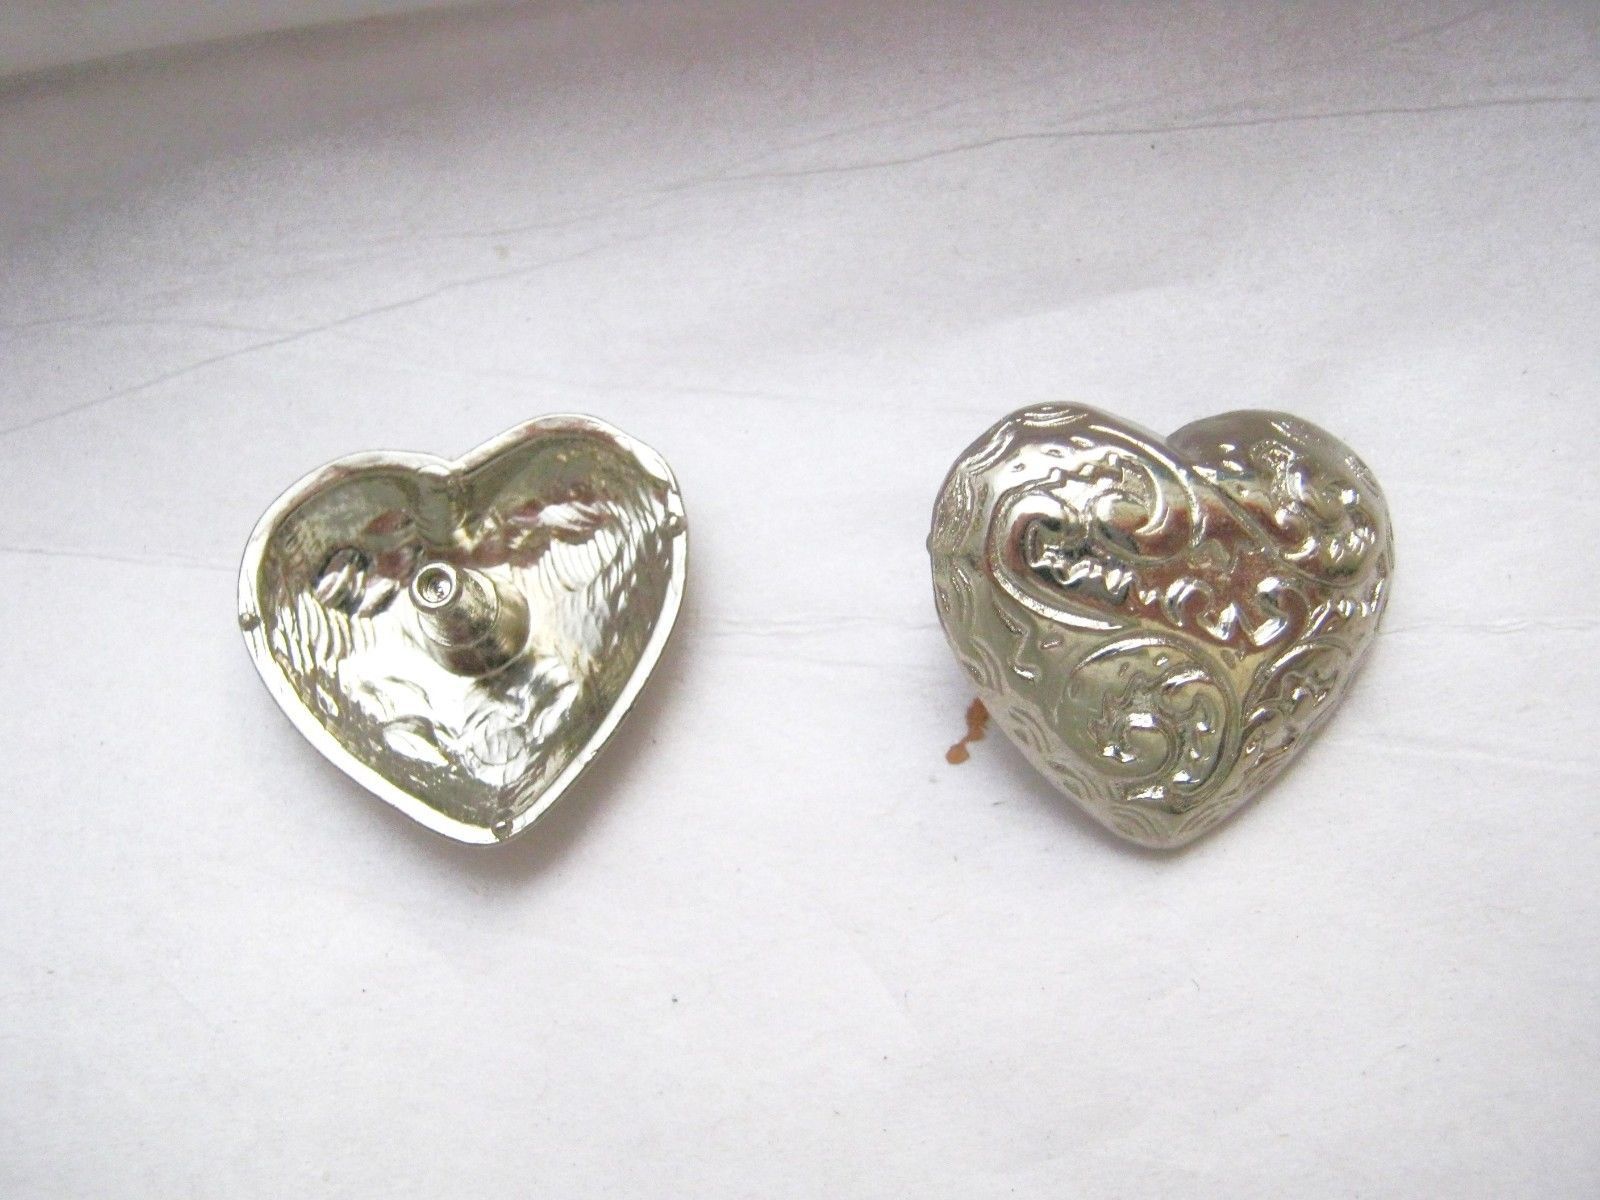 Heart silver metal stamped rivet concho  1  NOS  No Back caps set of 2